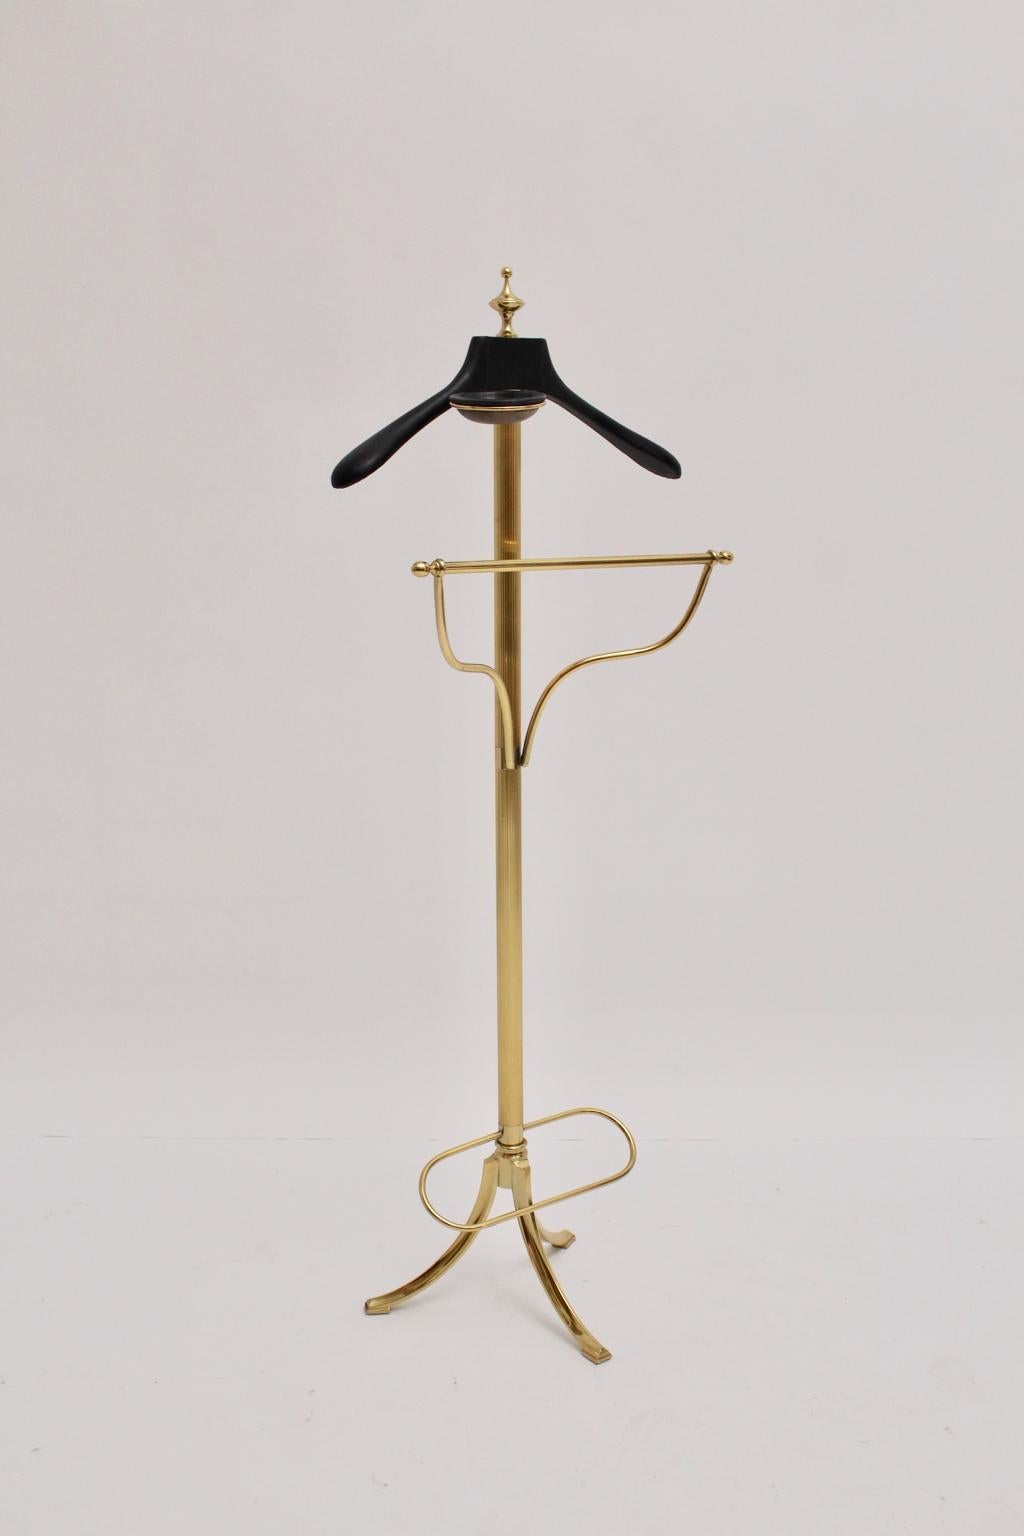 This beautiful and elegant brass valet was designed and manufactured in Italy.
The valet has a black leather covered clothes hanger and a black leather covered tray for utensils.
The valet features also a reling to hang up your pants. On the bottom